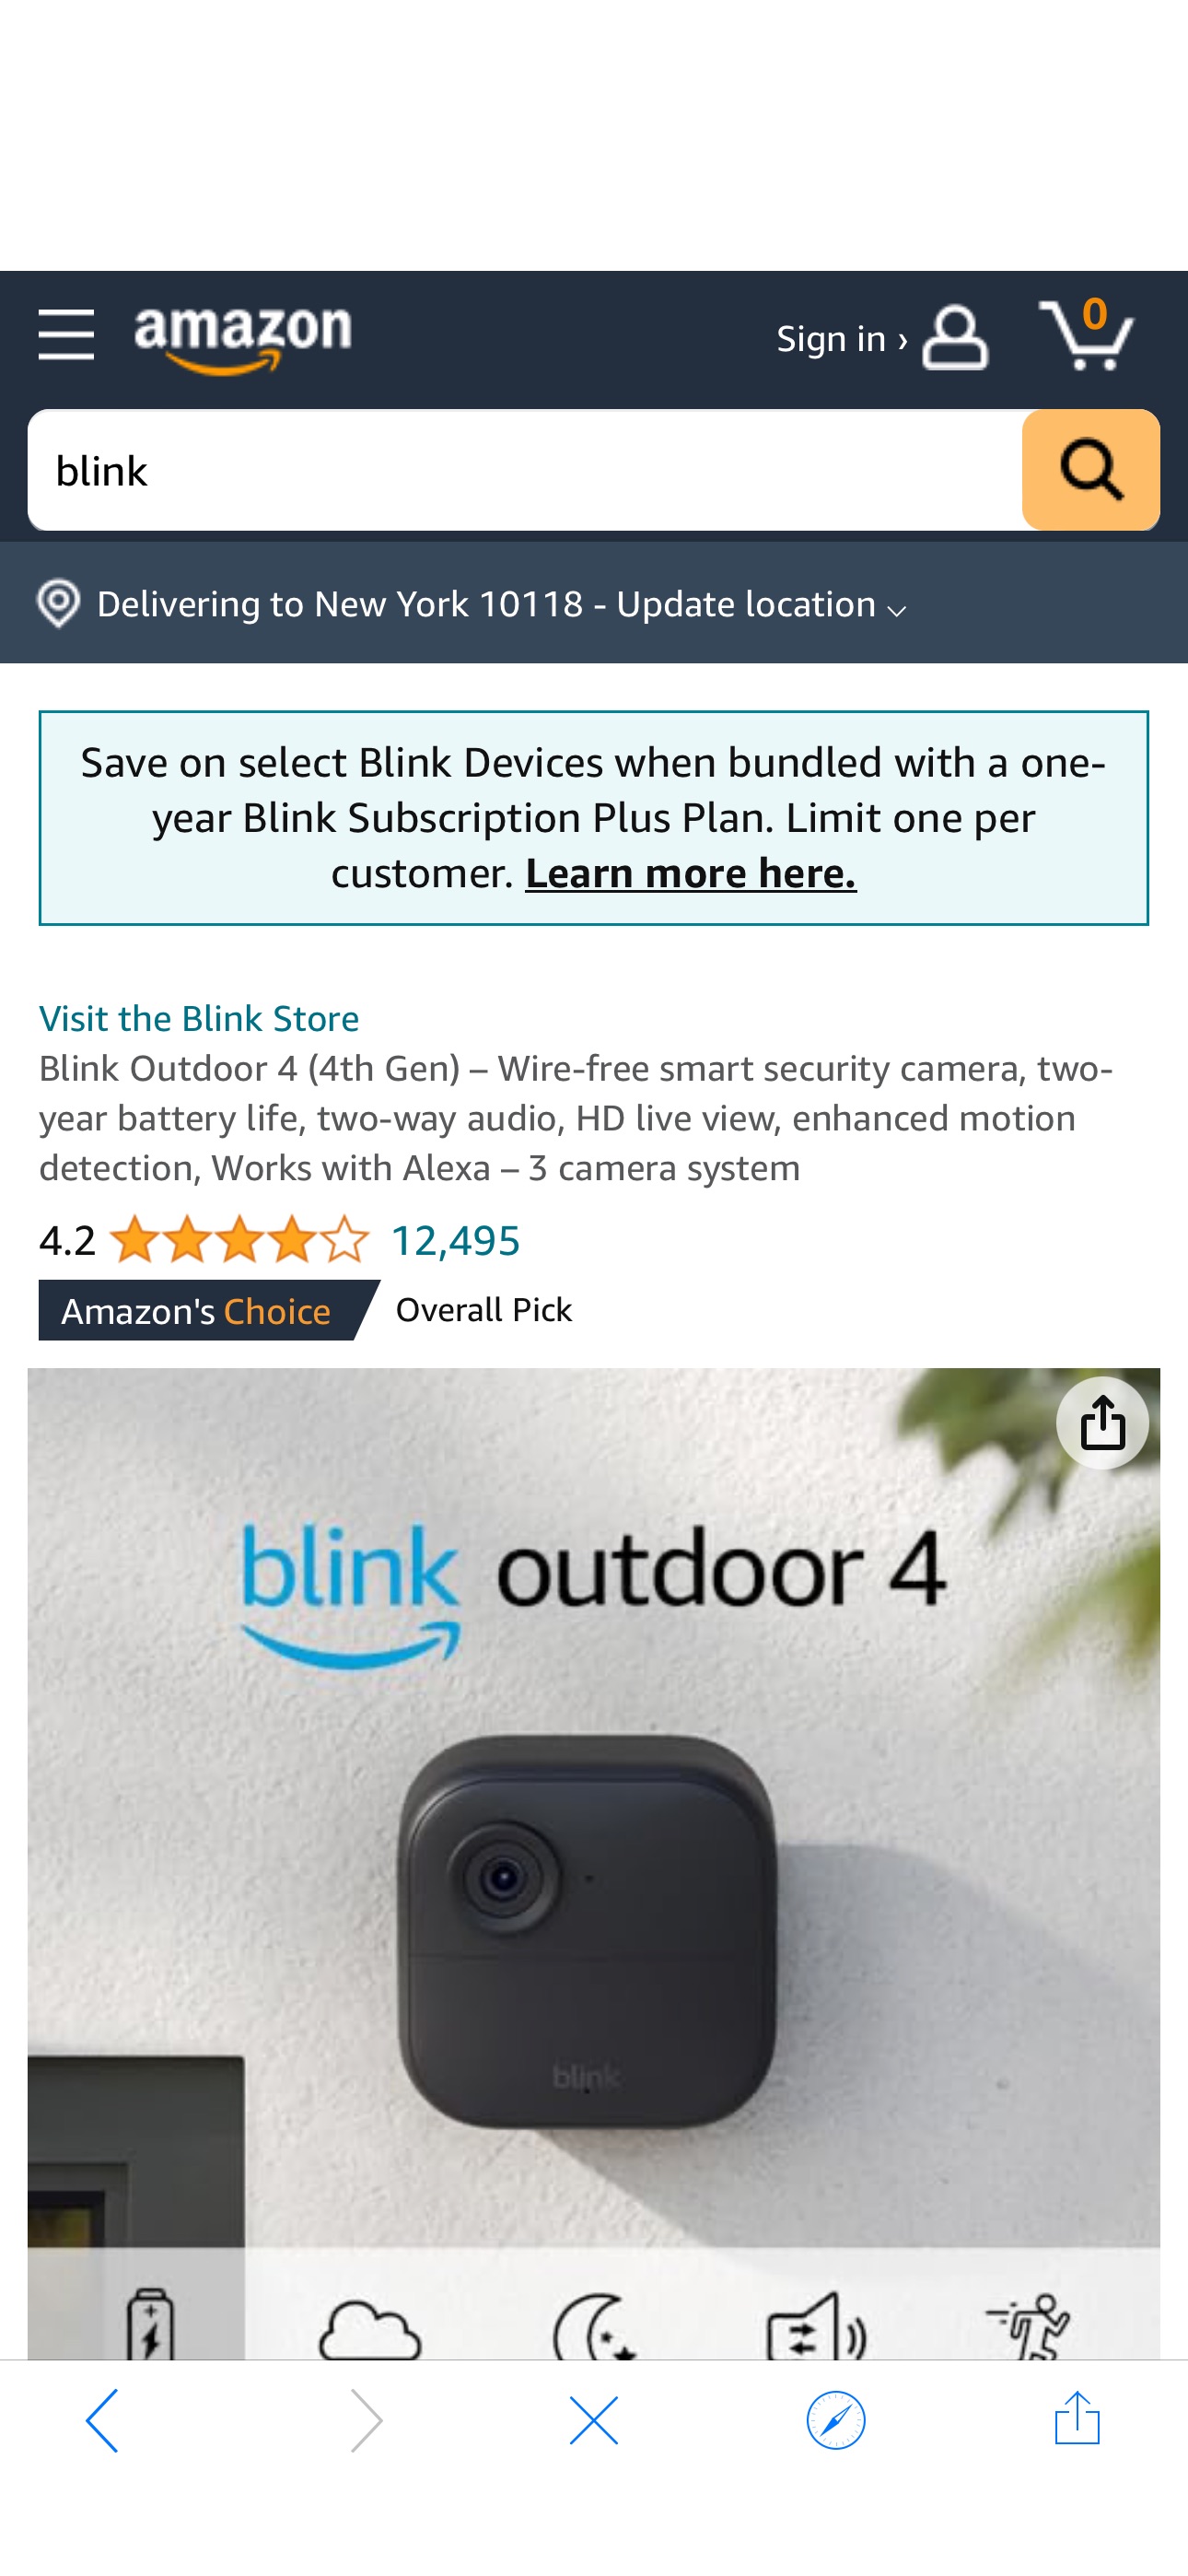 Amazon.com: Blink Outdoor 4 (4th Gen) – Wire-free smart security camera, two-year battery life, two-way audio, HD live view, enhanced motion detection, Works with Alexa – 3 camera system : Everything 